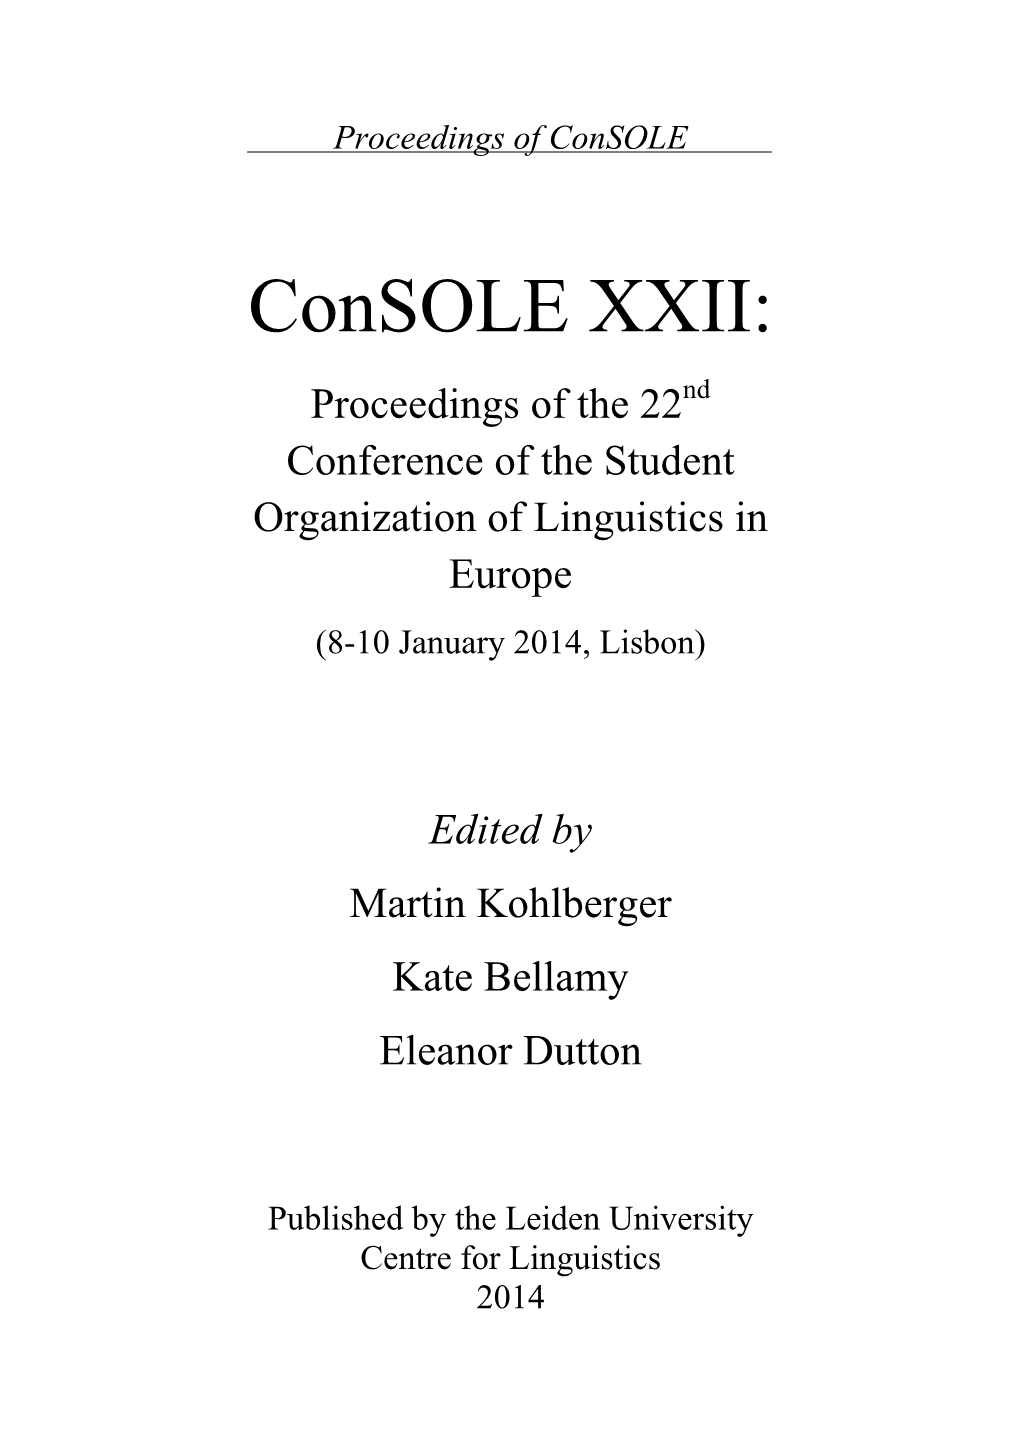 Console XXII: Proceedings of the 22Nd Conference of the Student Organization of Linguistics in Europe (8-10 January 2014, Lisbon)